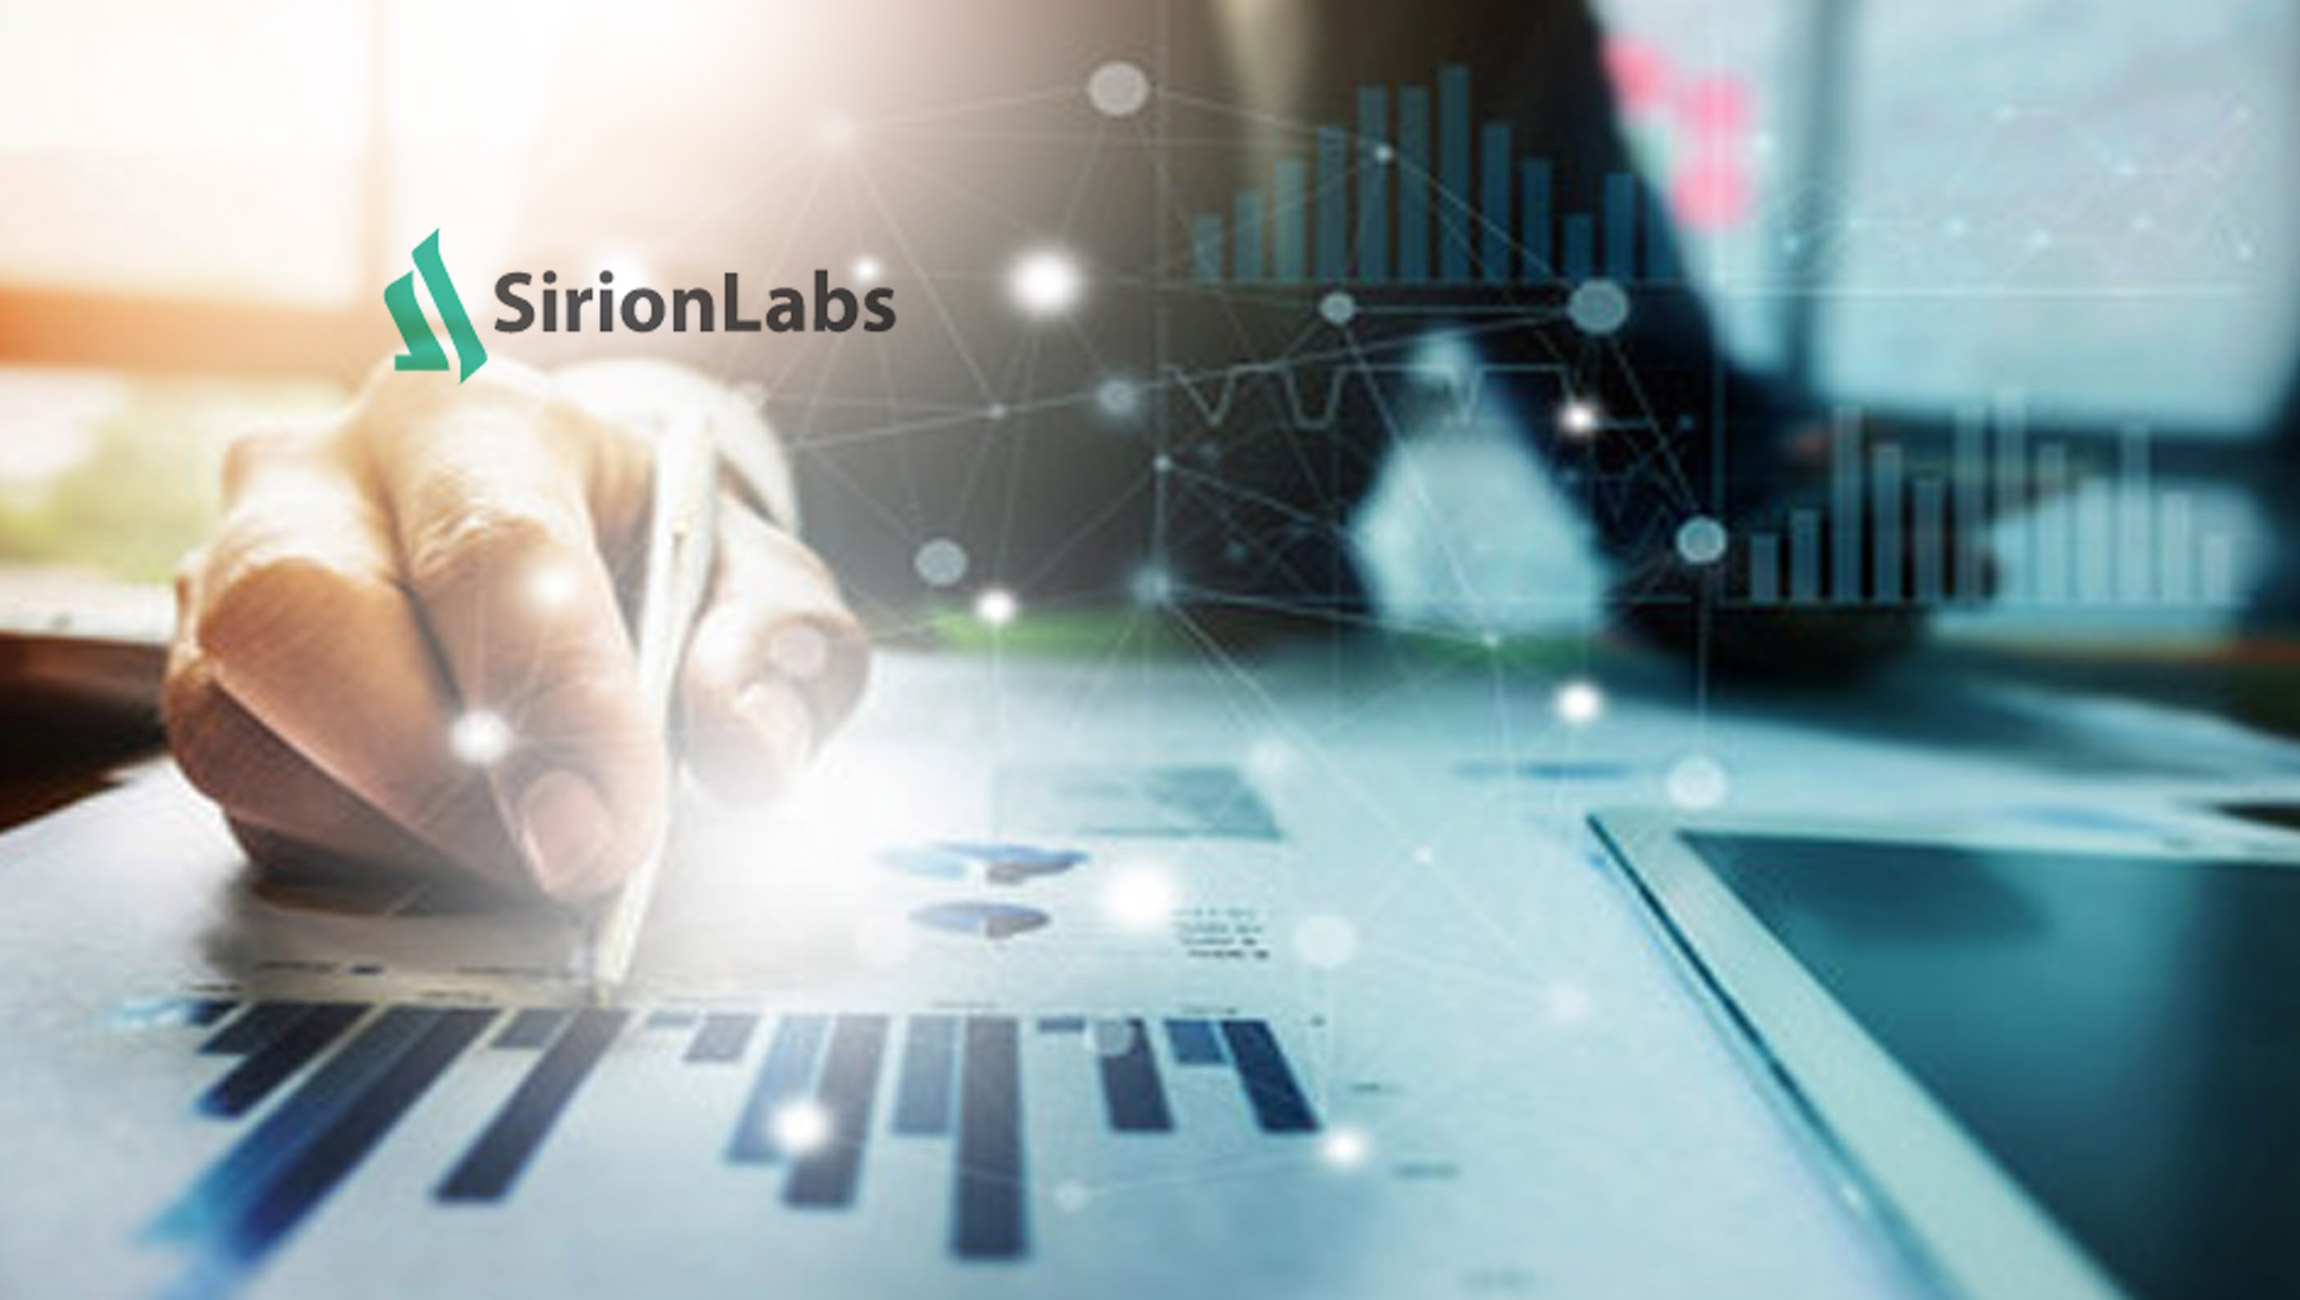 SirionLabs Named Gold Medalist and Leader in 2022 SoftwareReviews Contract Lifecycle Management Data Quadrant